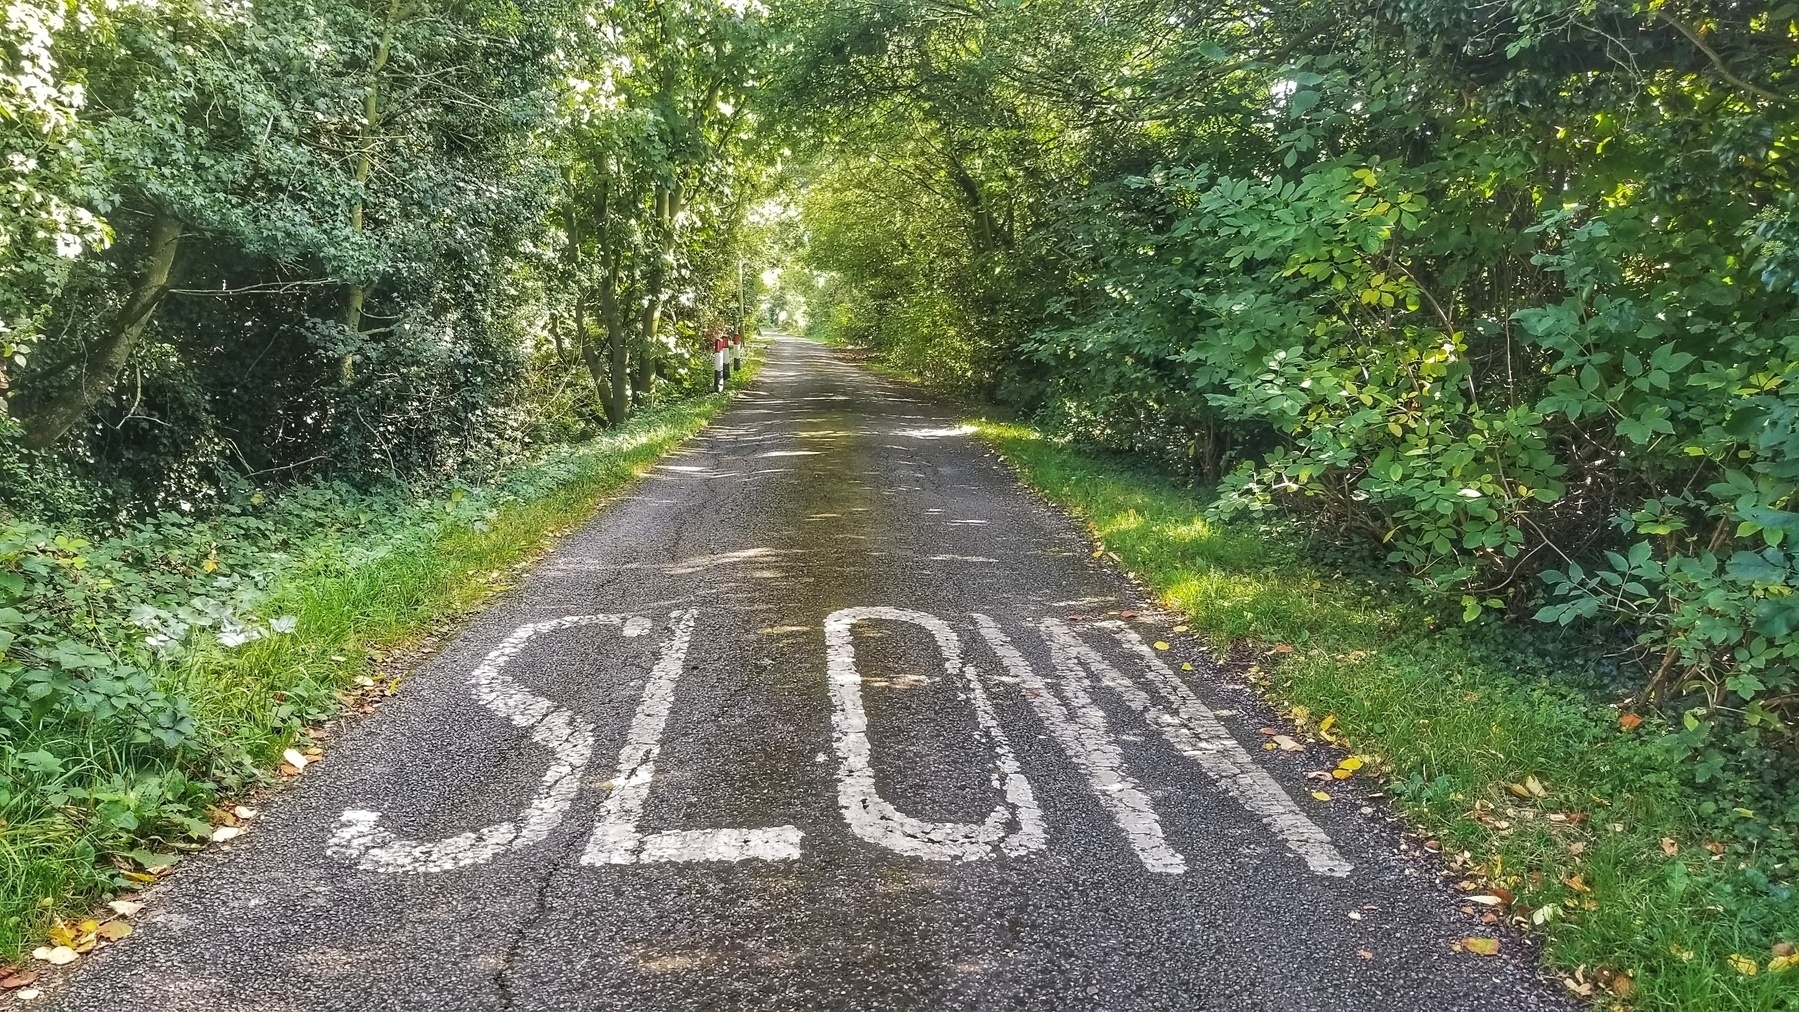 Looking down a single-way country lane, lined with trees along both sides. In the foreground, the word SLOW is painted across the full width of the road.